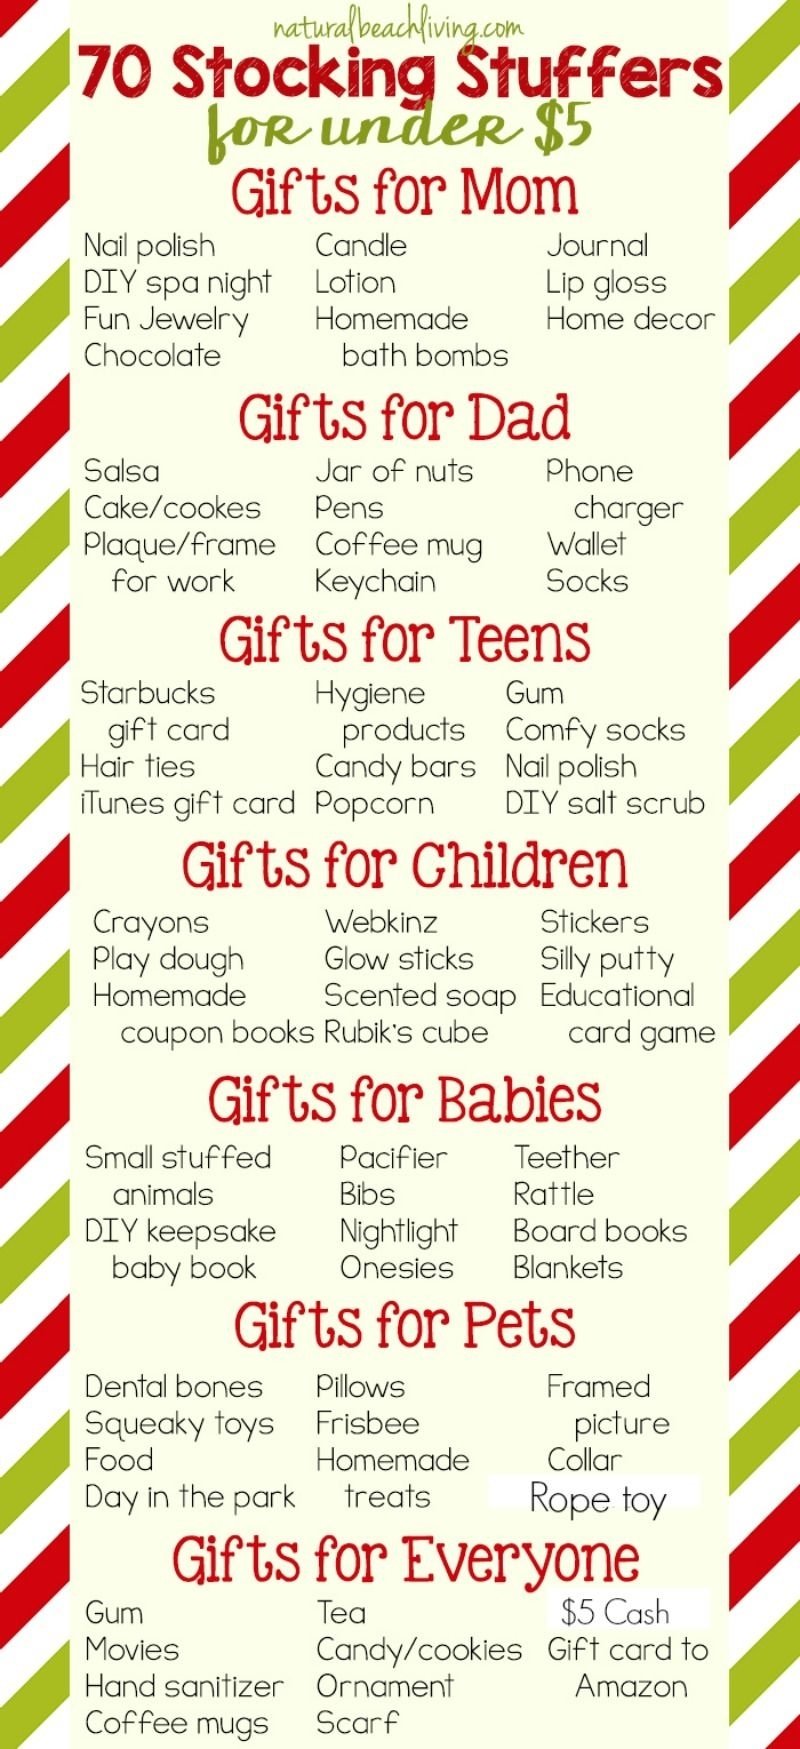 10 Spectacular Stocking Stuffer Ideas For Teenagers 70 super stocking stuffers for under 5 dad baby stocking 9 2022